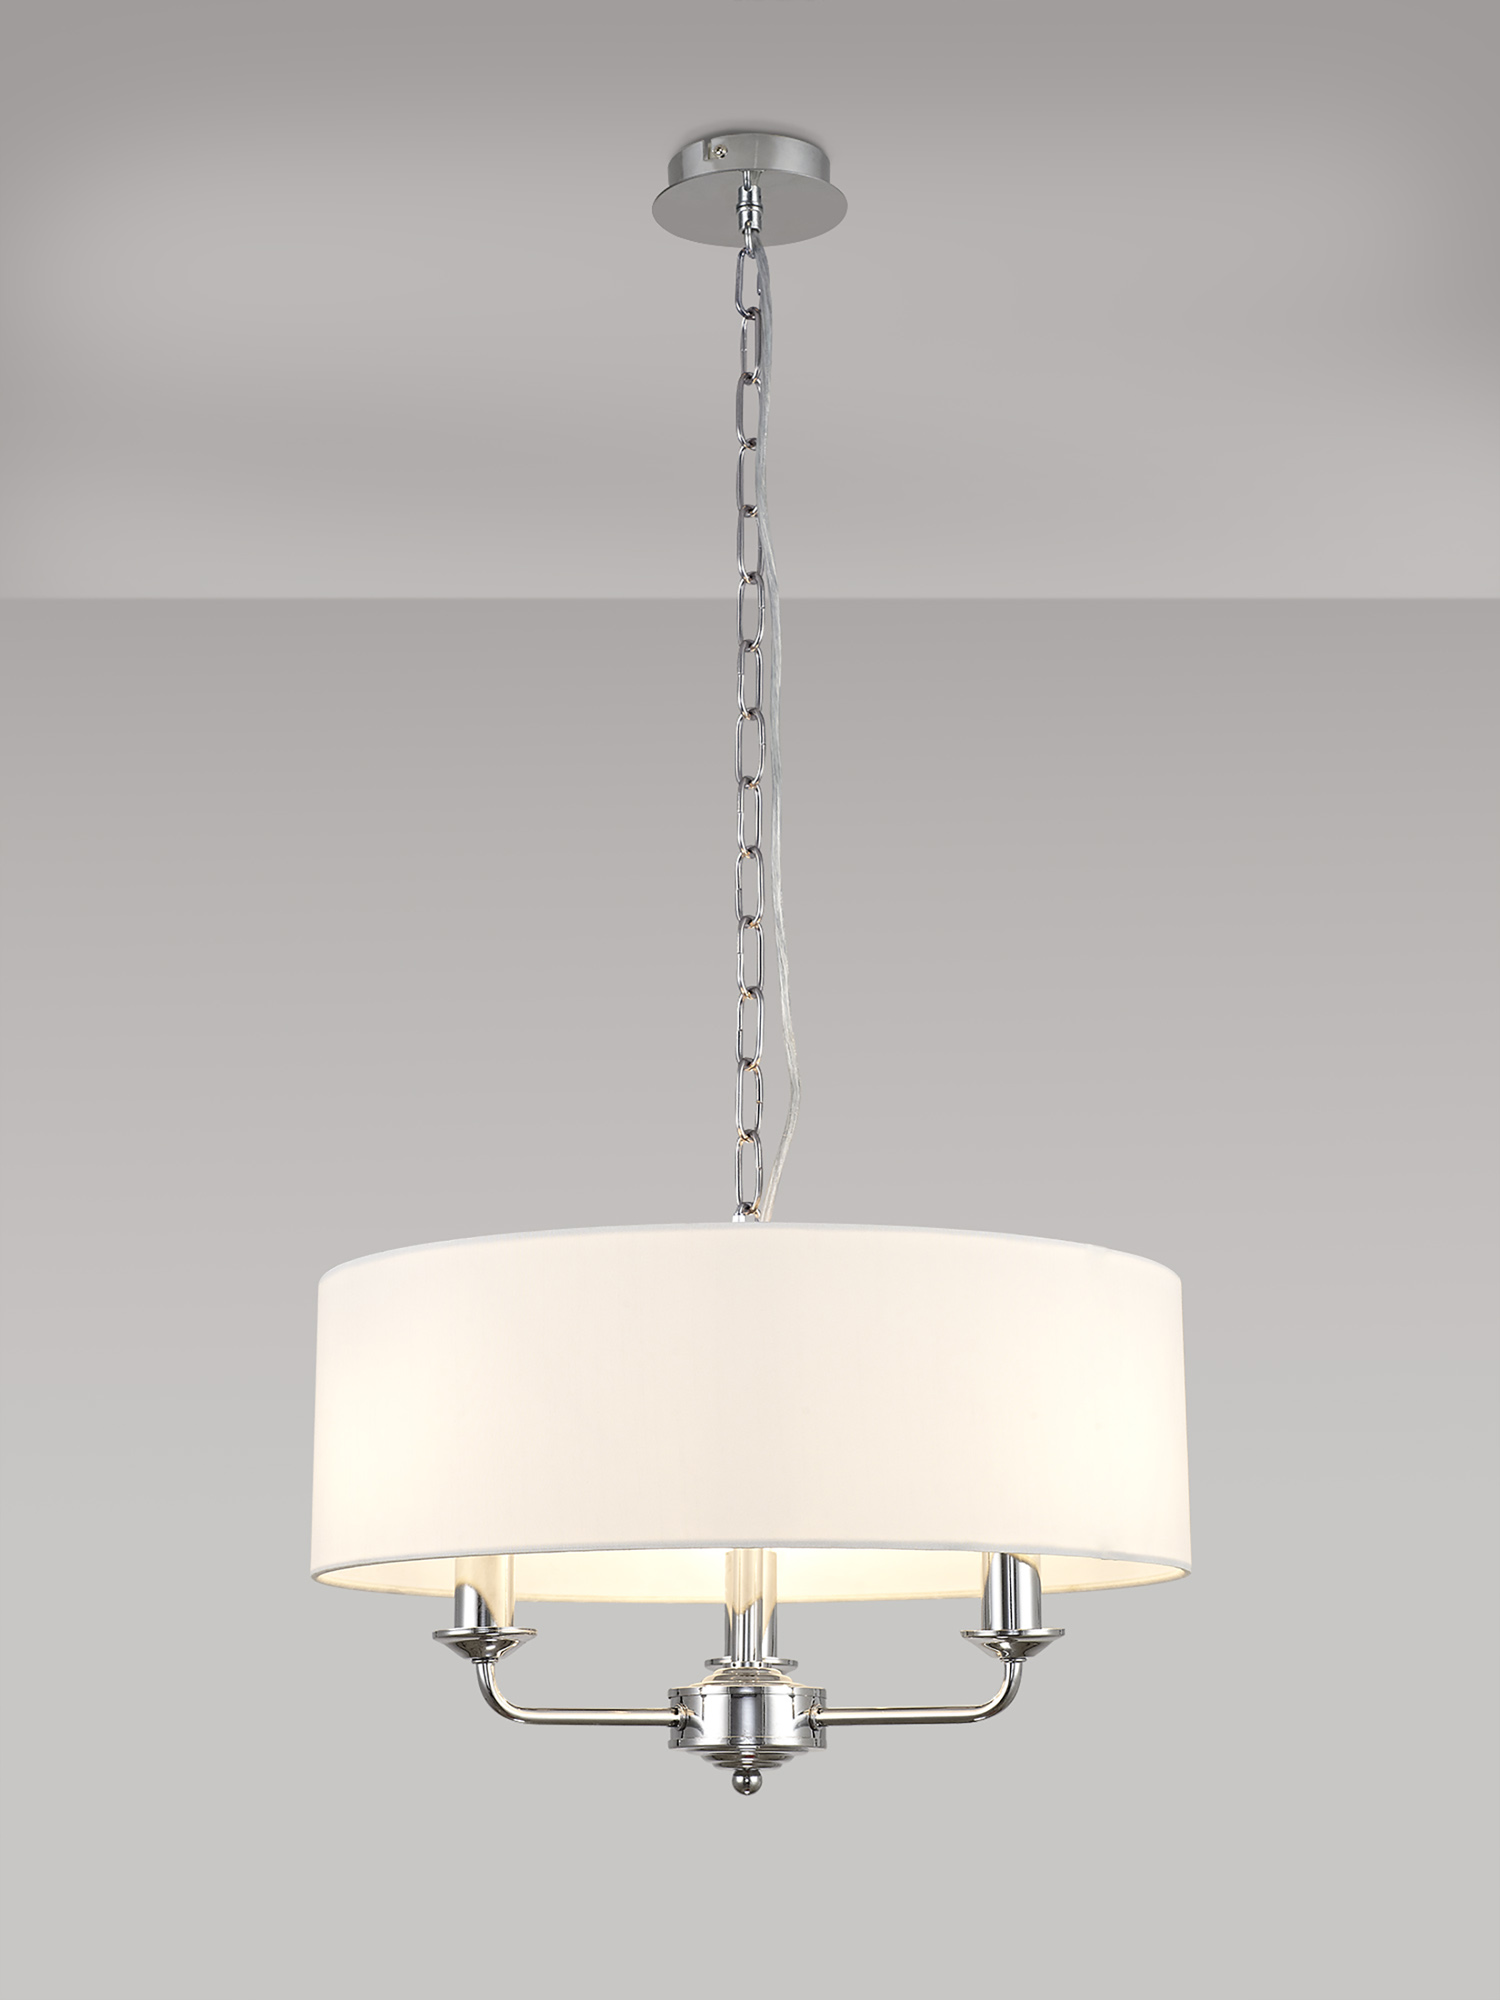 Banyan CH WH Ceiling Lights Deco Multi Arm Fittings